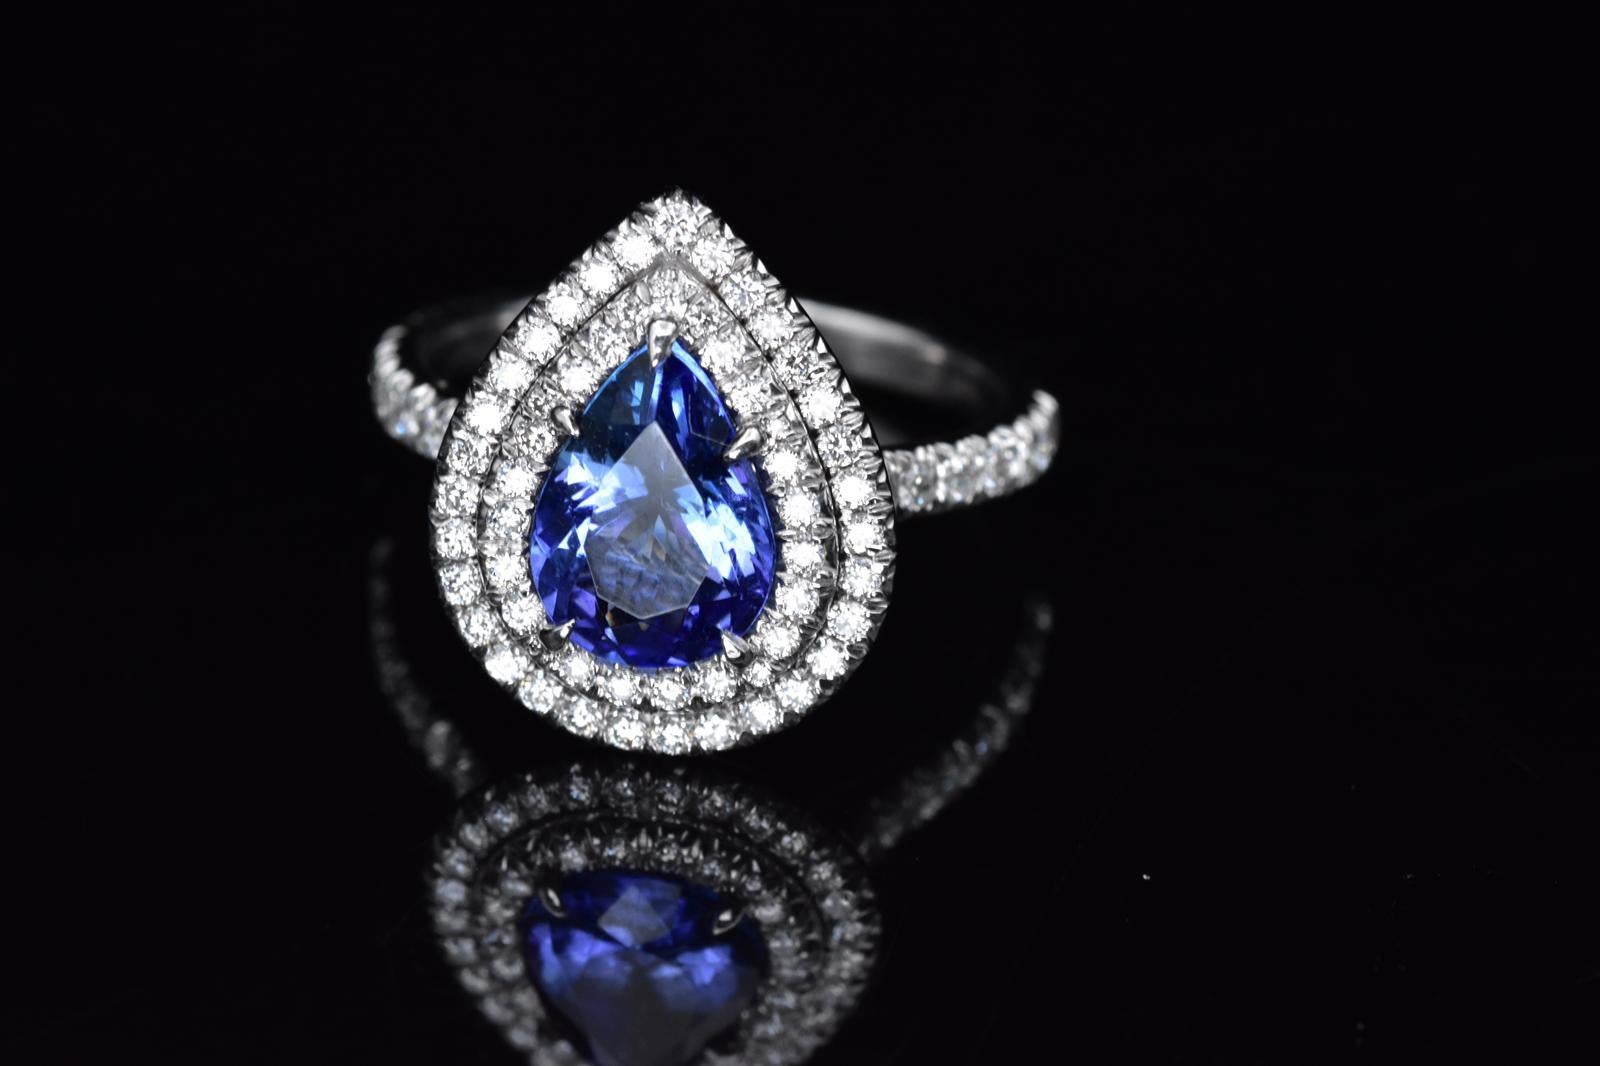 Tiffany CO Soleste Platinum ring with Pear Shape Tanzanite 
Tanzanite approximate weight is 1.25 
Diamonds , carat weight .45 
Size : US 6 ( can be resized with the request)
Comes with: original Tiffany box and valuation report for insurance